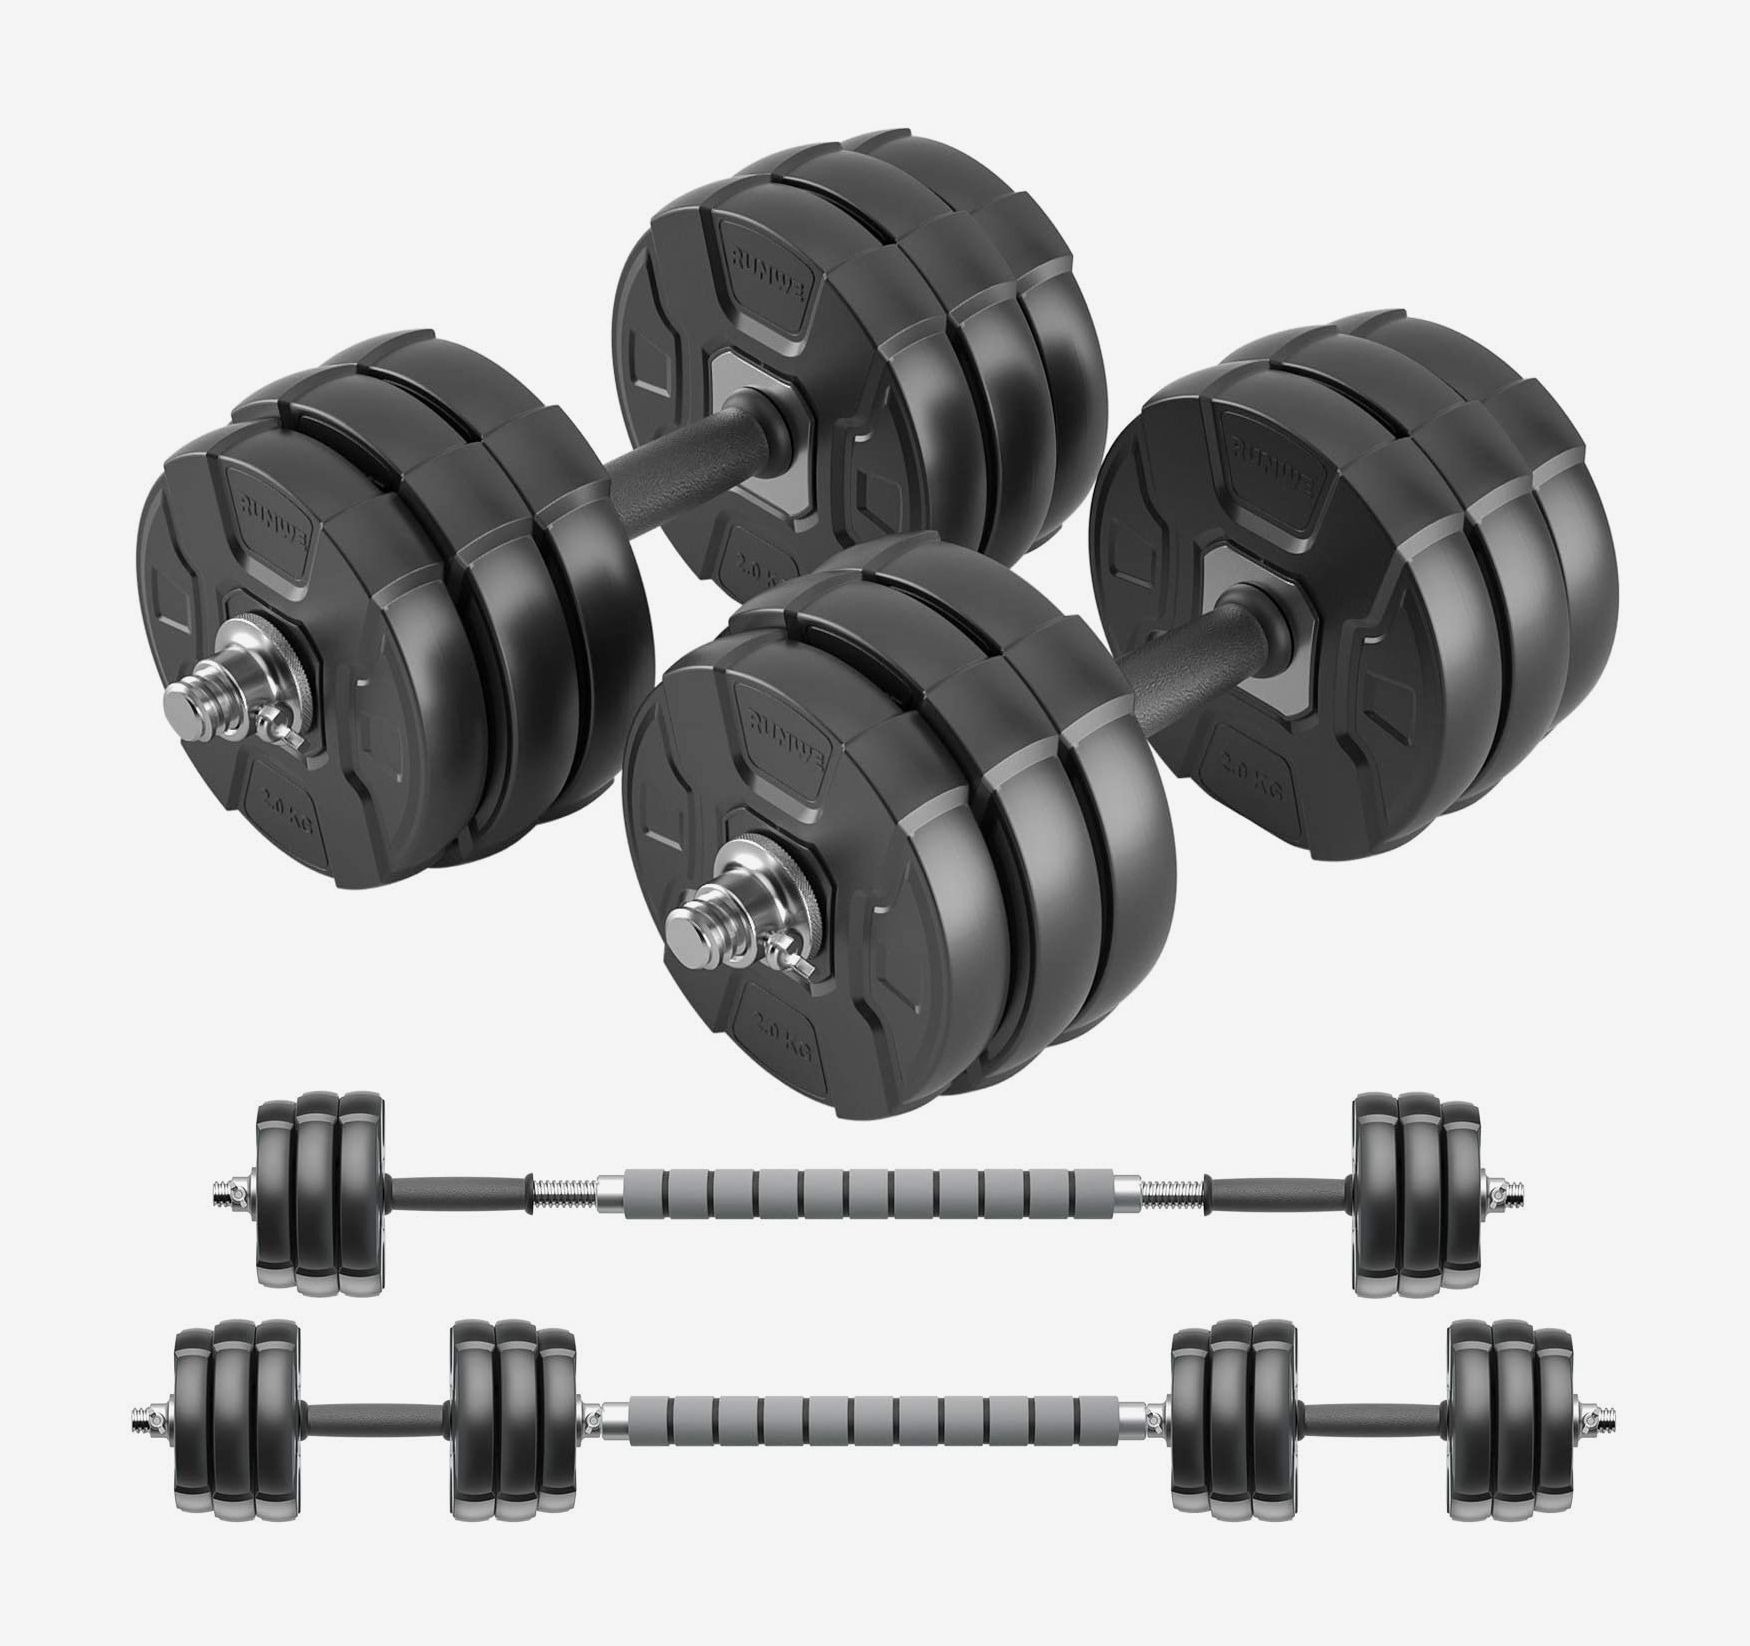 RUN.SE Set of 2 Adjustable Dumbbell Weight Pair with Non-Slip Neoprene Handle Multiple Weight Options Single All-Purpose Exercise Dumbbells 10KG